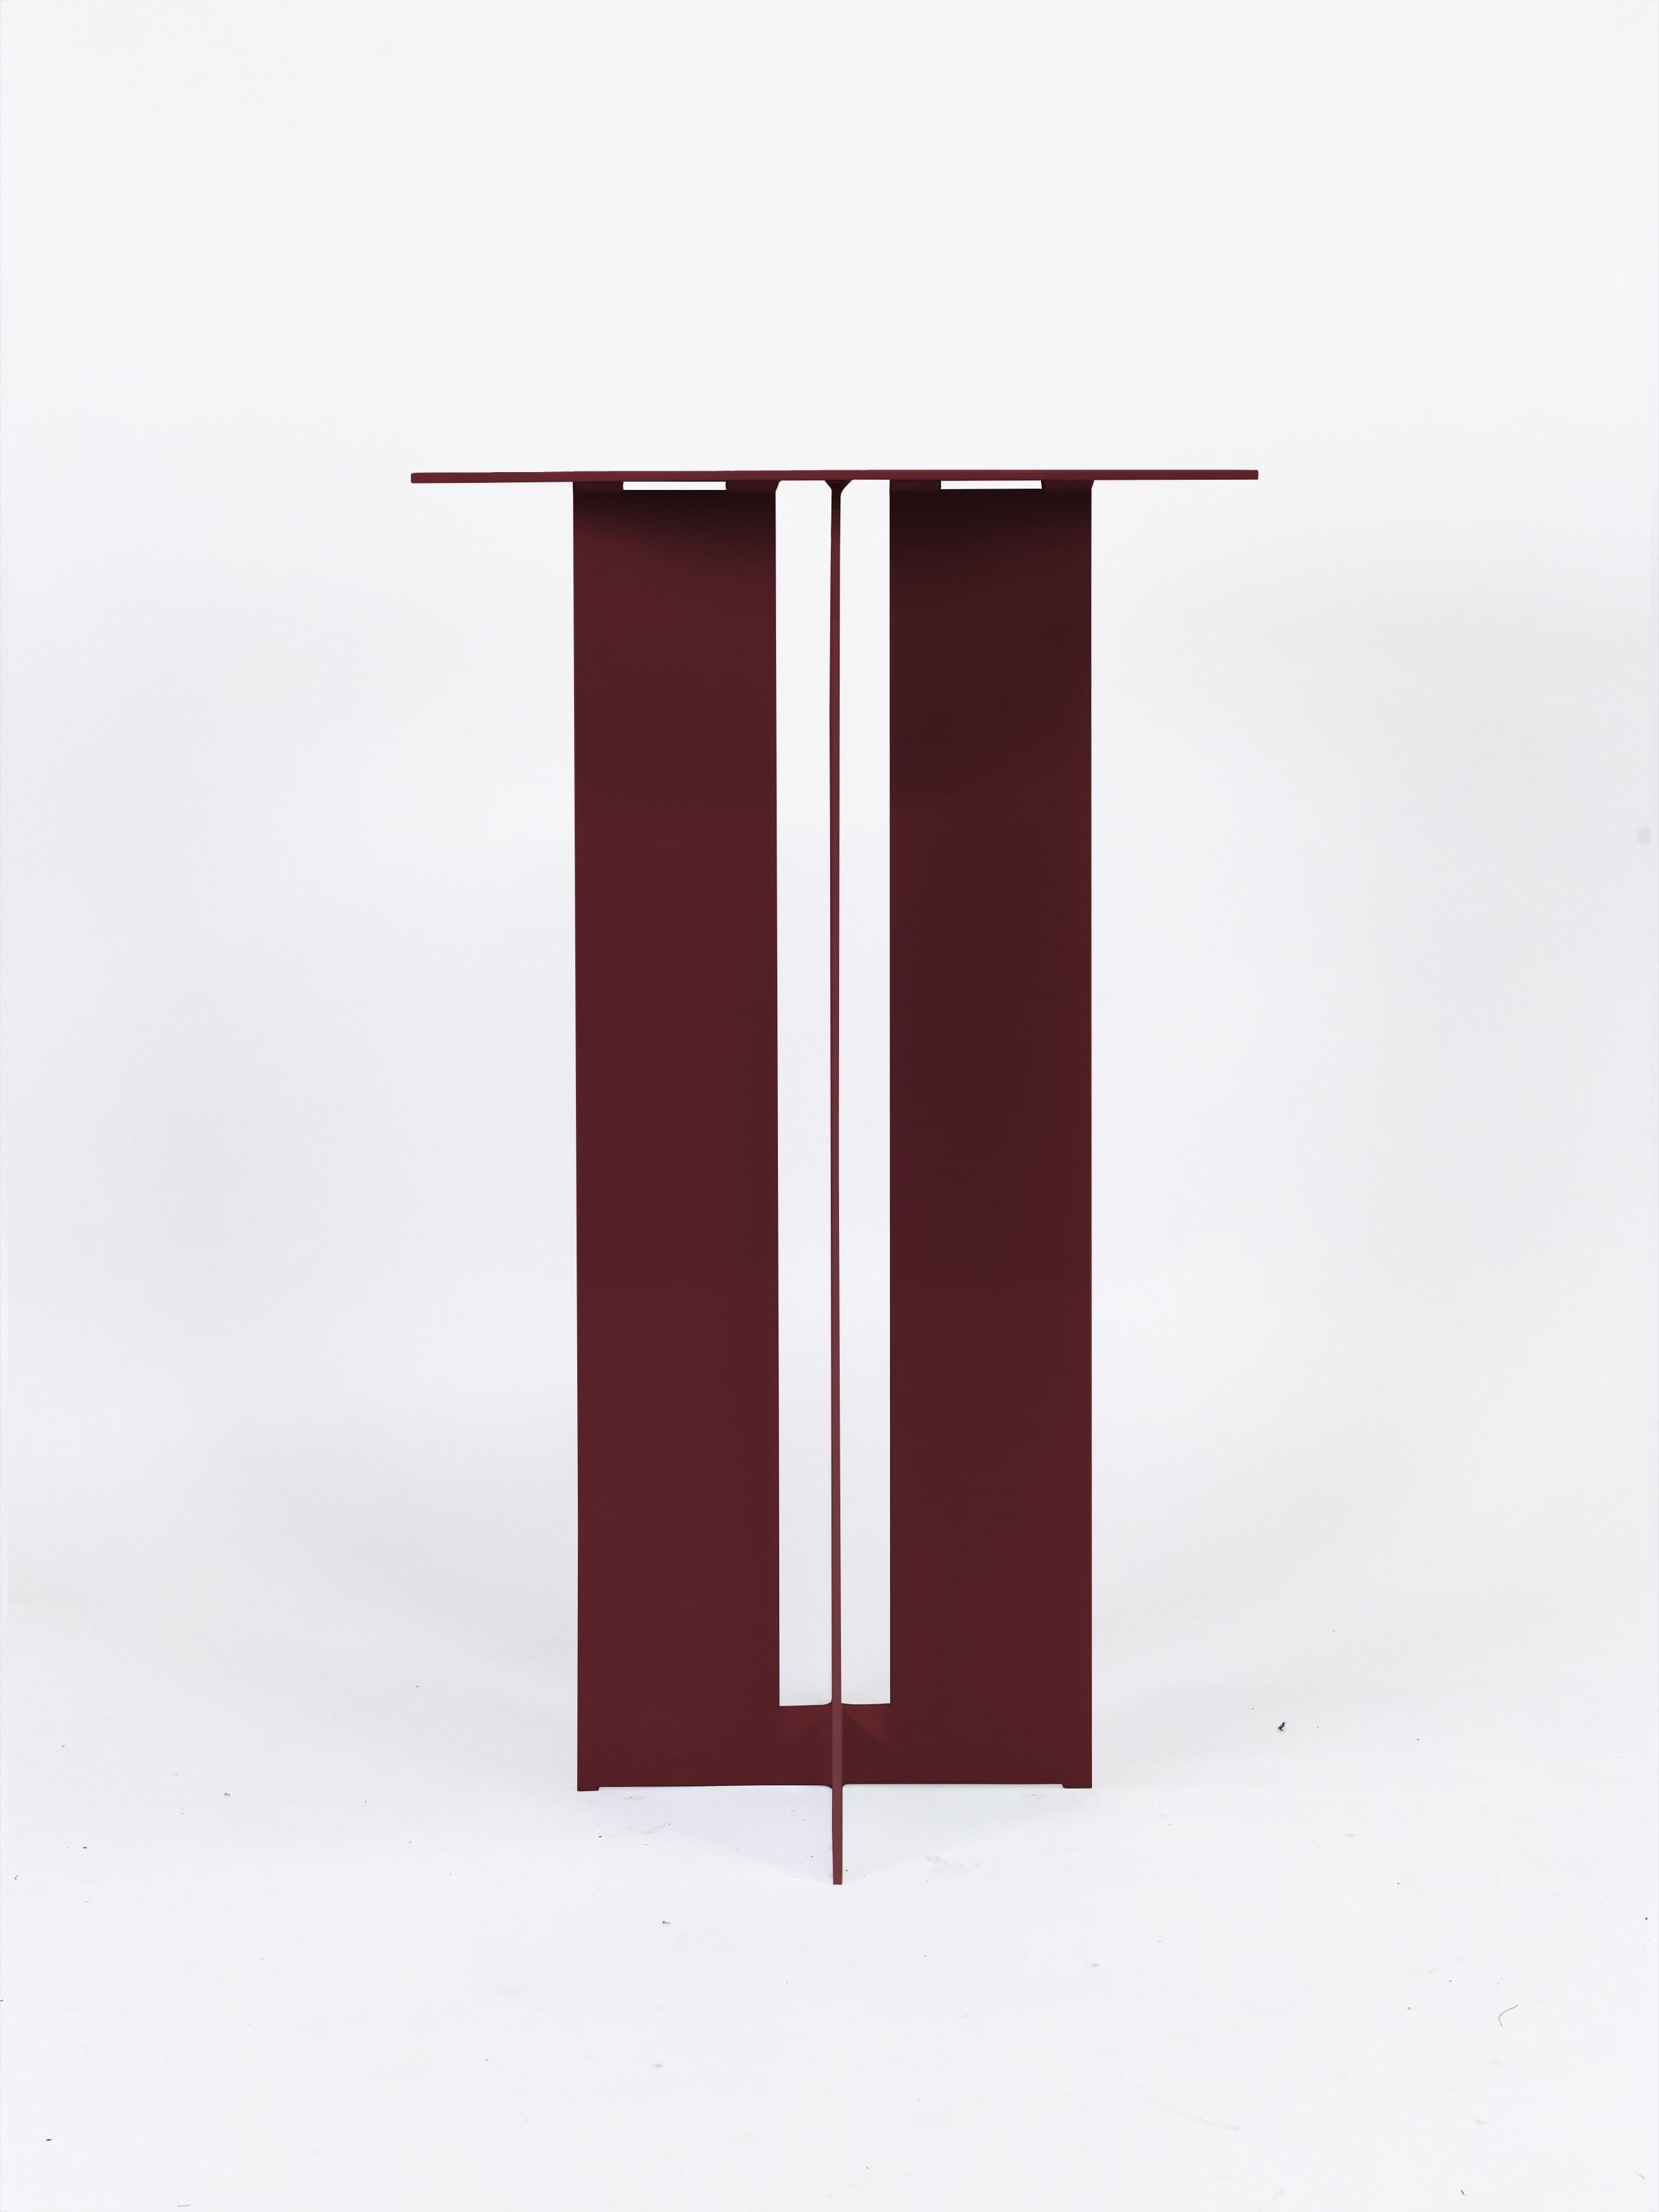 The Mers café table is fabricated from solid aluminum and is suitable for use indoors and out. Form is inspired by the simple utilitarianism of West Coast aluminum fishing boats.

Shown in aluminum with Burgundy painted finish.
Custom sizing and